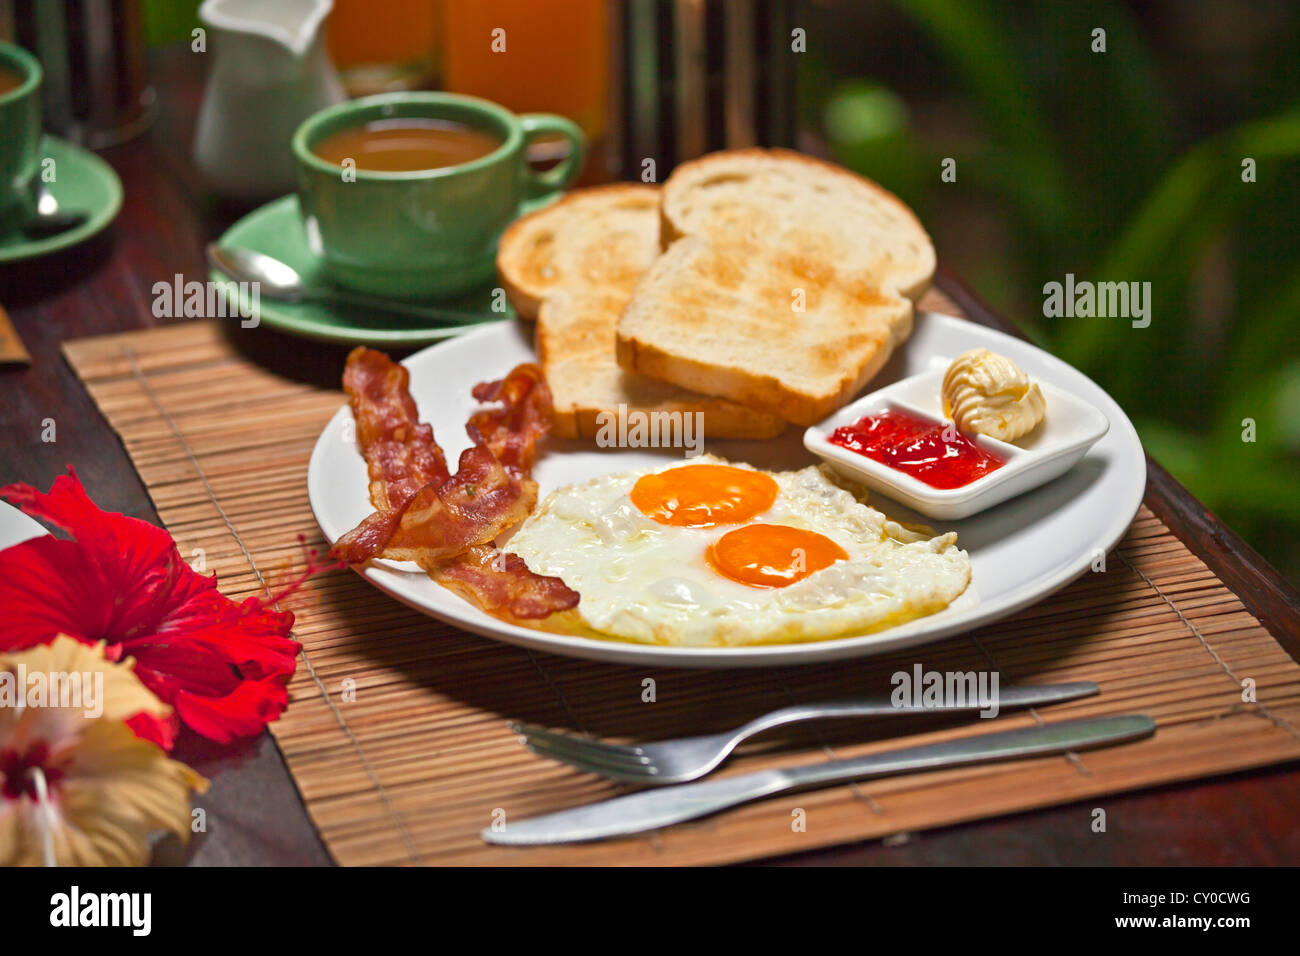 A AMERICAN BREAKFAST served at OUR JUNGLE HOUSE KHAO SOK NATIONAL PARK - SURATHANI PROVENCE, THAILAND Stock Photo